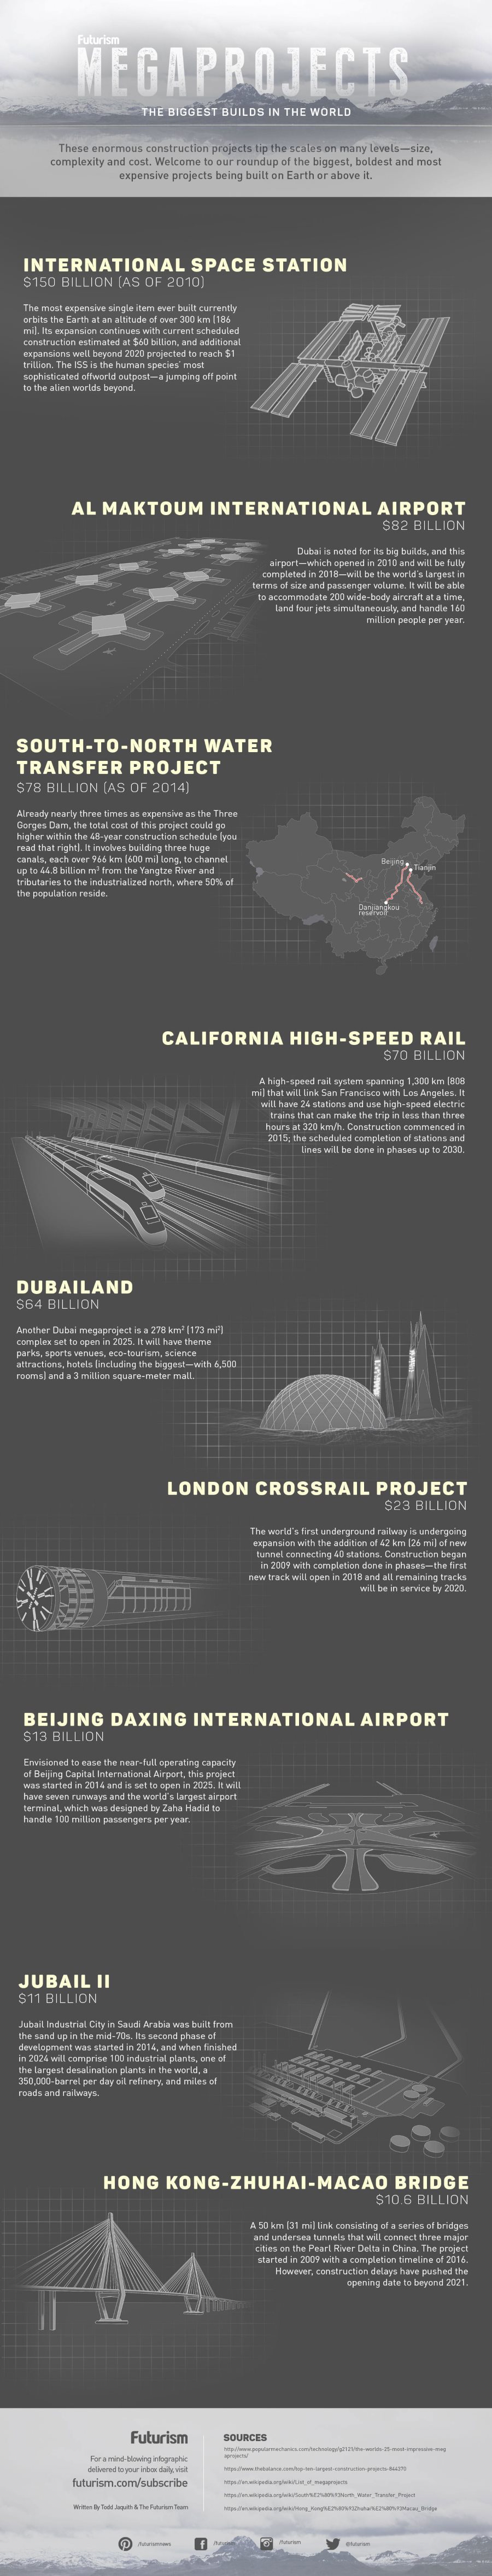 megaprojects-infographic